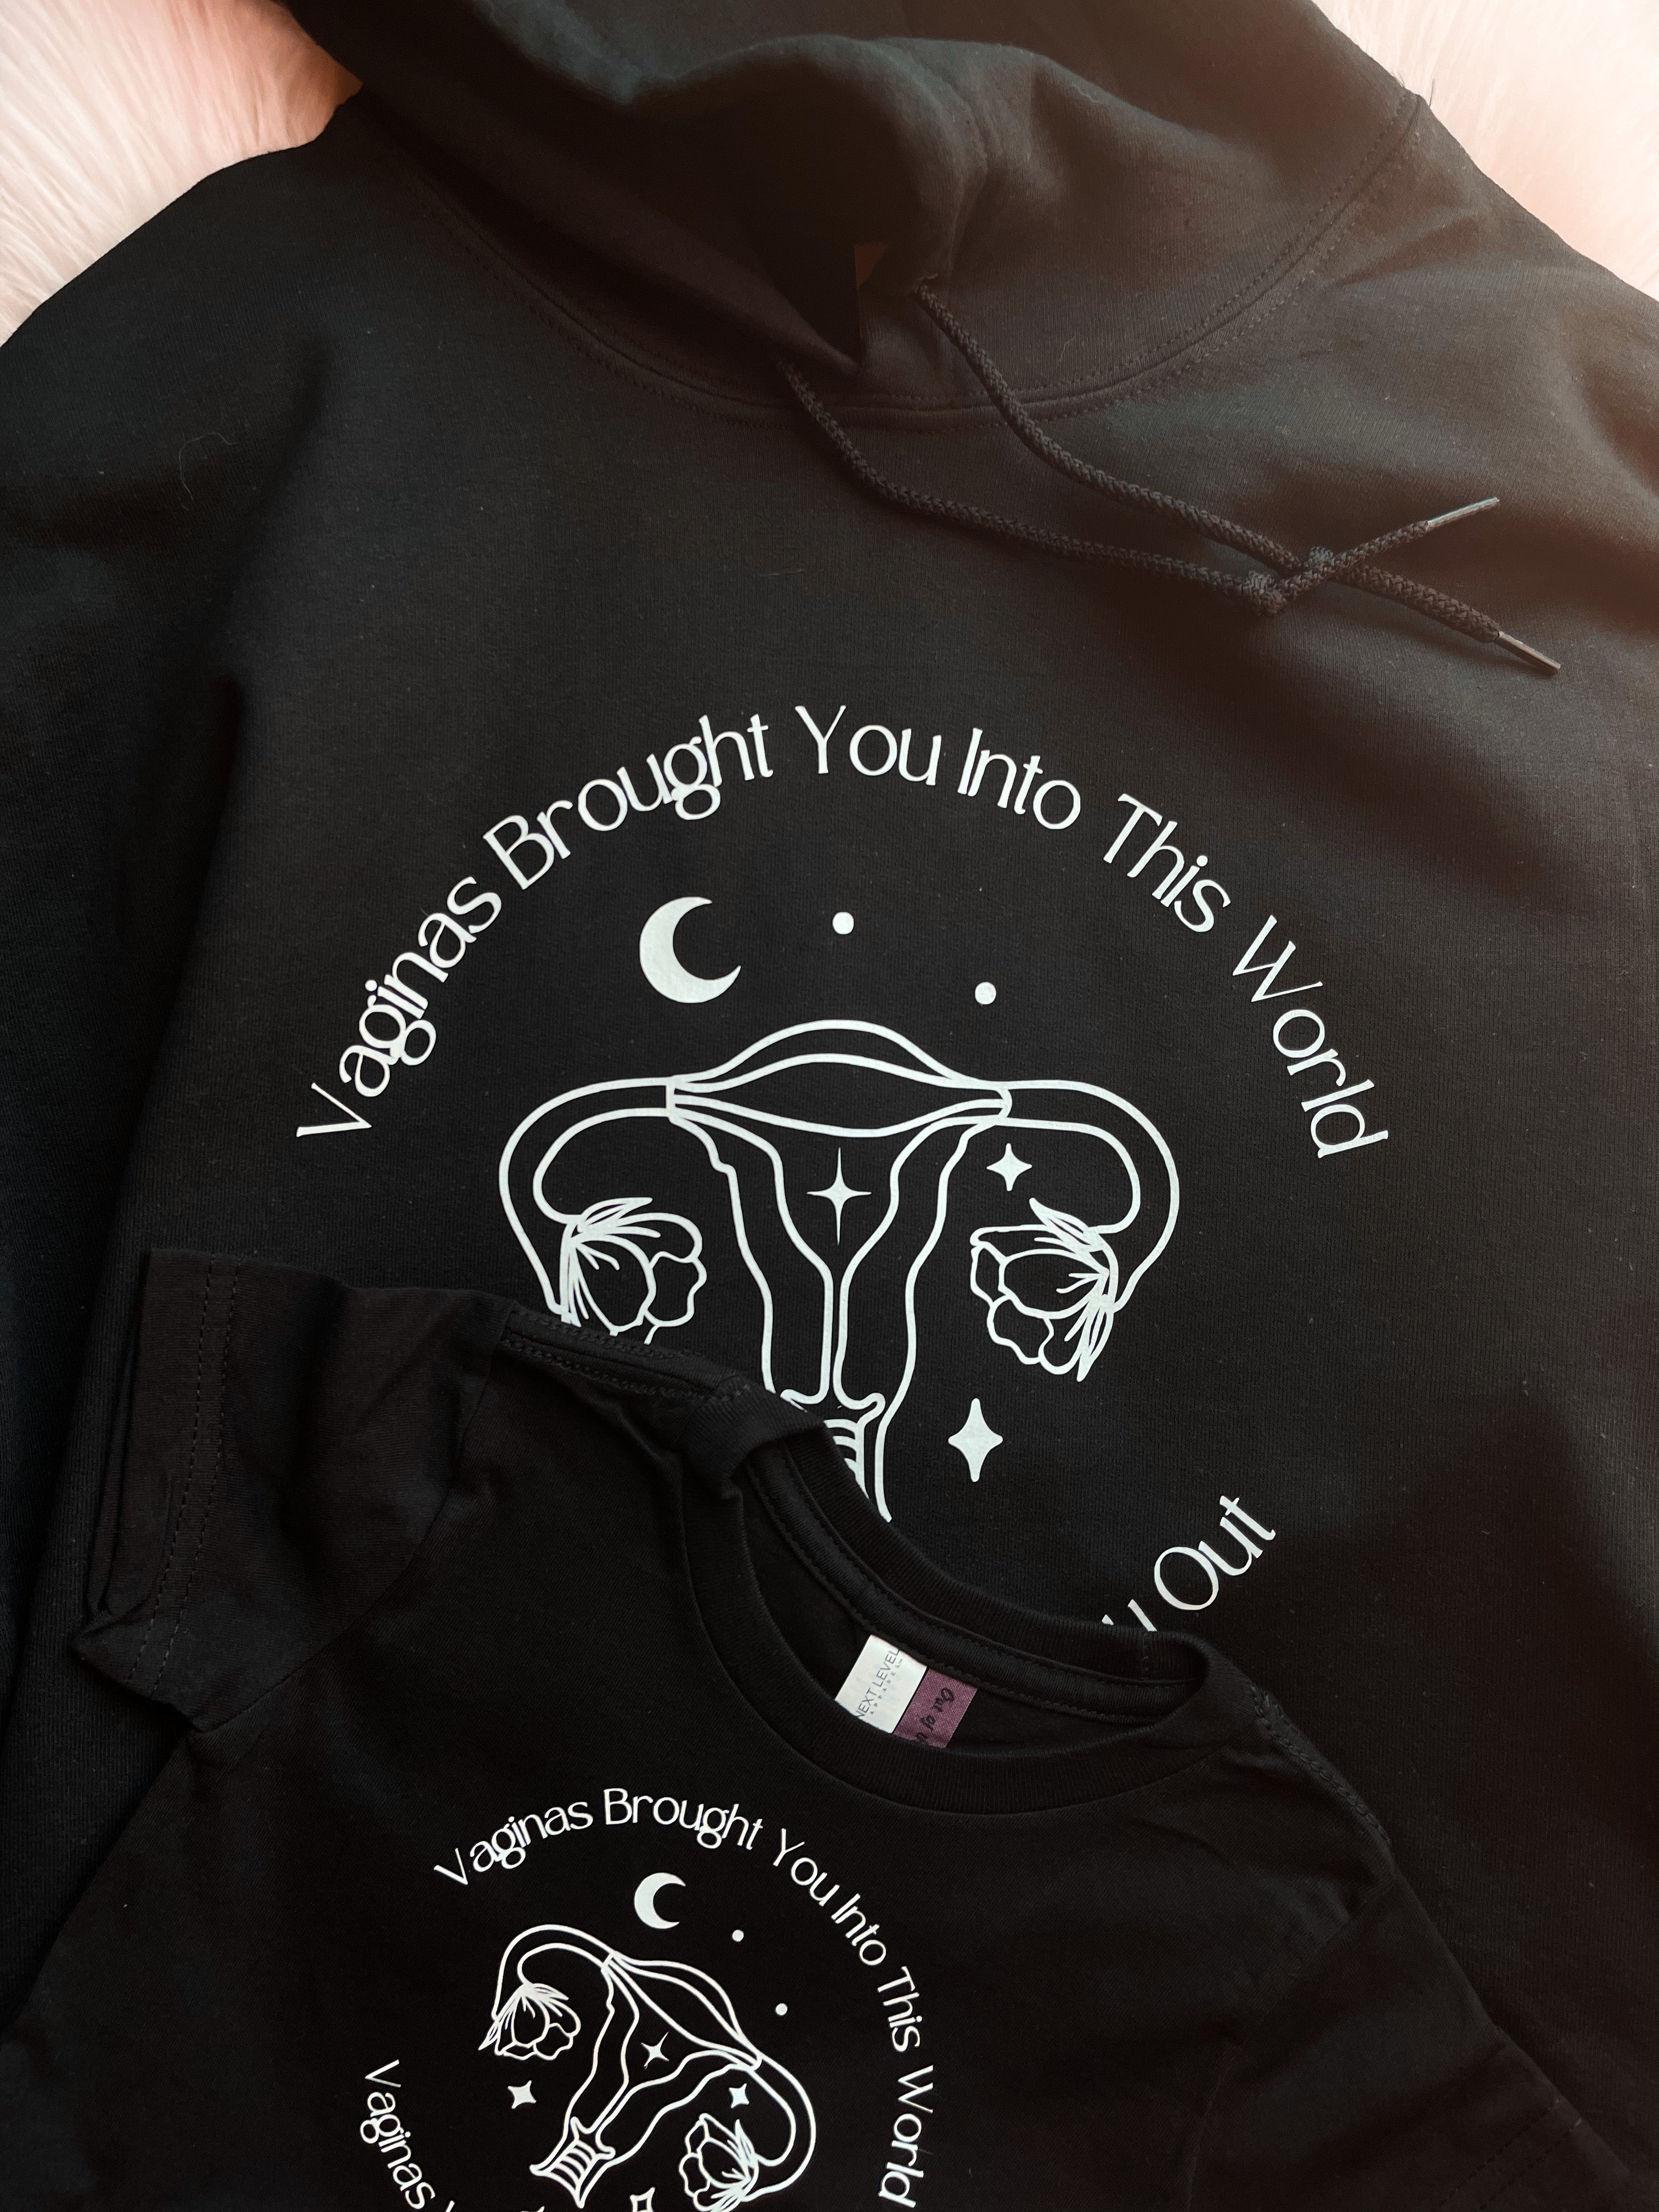 Vaginas Brought You Into This World Vaginas Will Vote You Out (Hoodie)